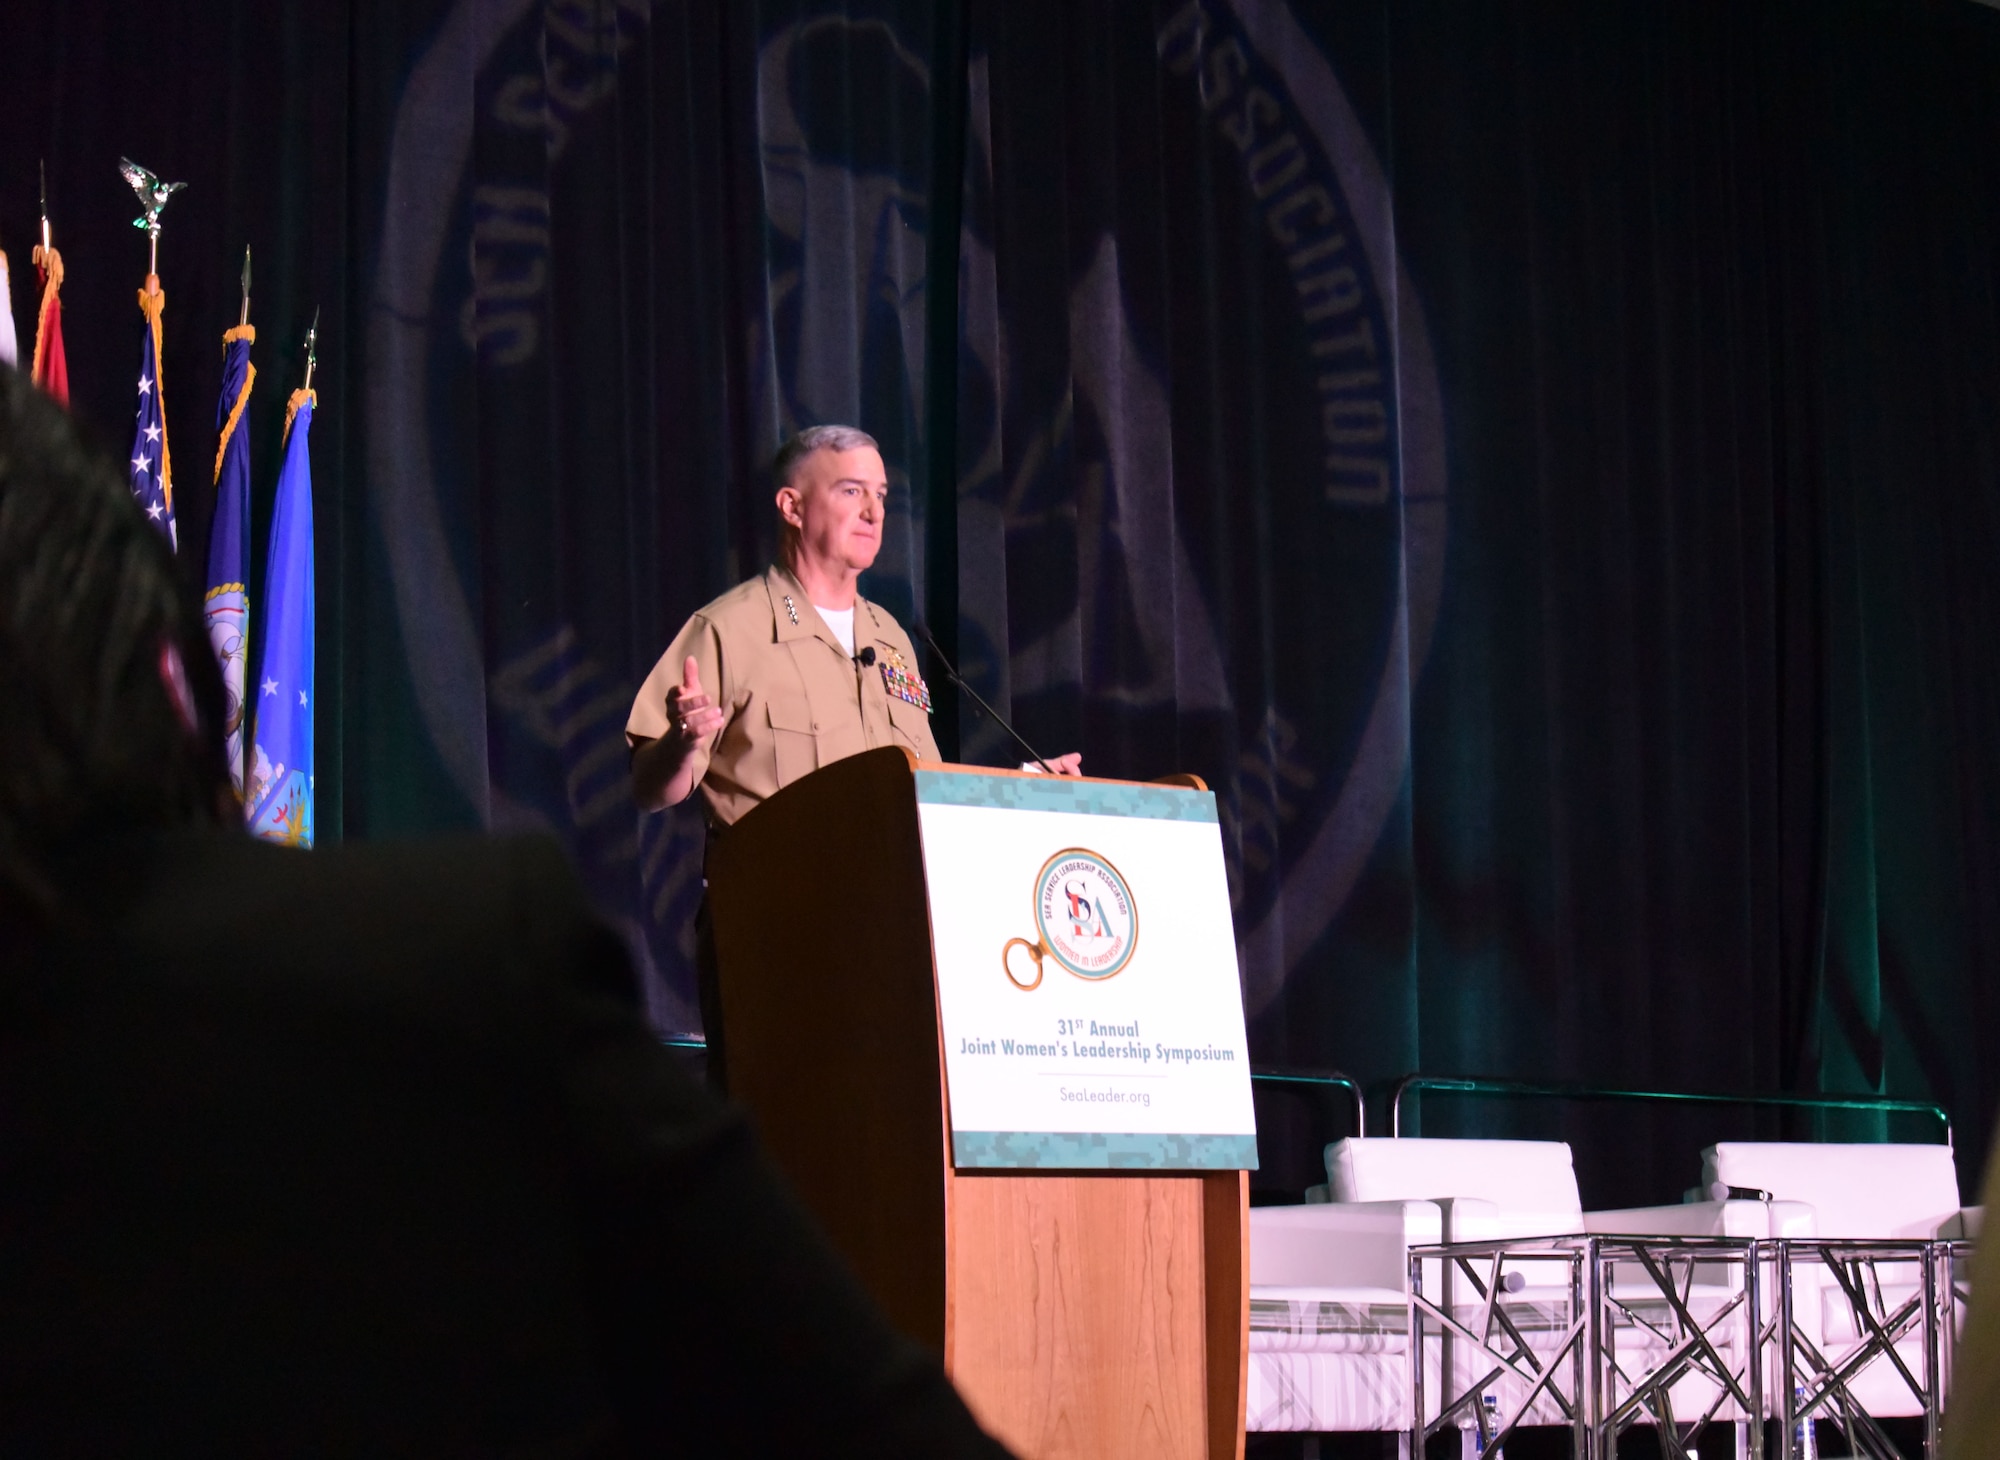 The Assistant Commandant of the Marine Corps, Gen. Glenn M. Walters, addresses attendees at the 2018 Joint Women's Leadership Symposium June 21, 2018, in San Diego, Calif. The JWLS included attendees from the U.S. Air Force, Army, Navy, Marine Corps, and Coast Guard and 20 other countries. (U.S. Air Force photo by 1st Lt. Annabel Monroe)